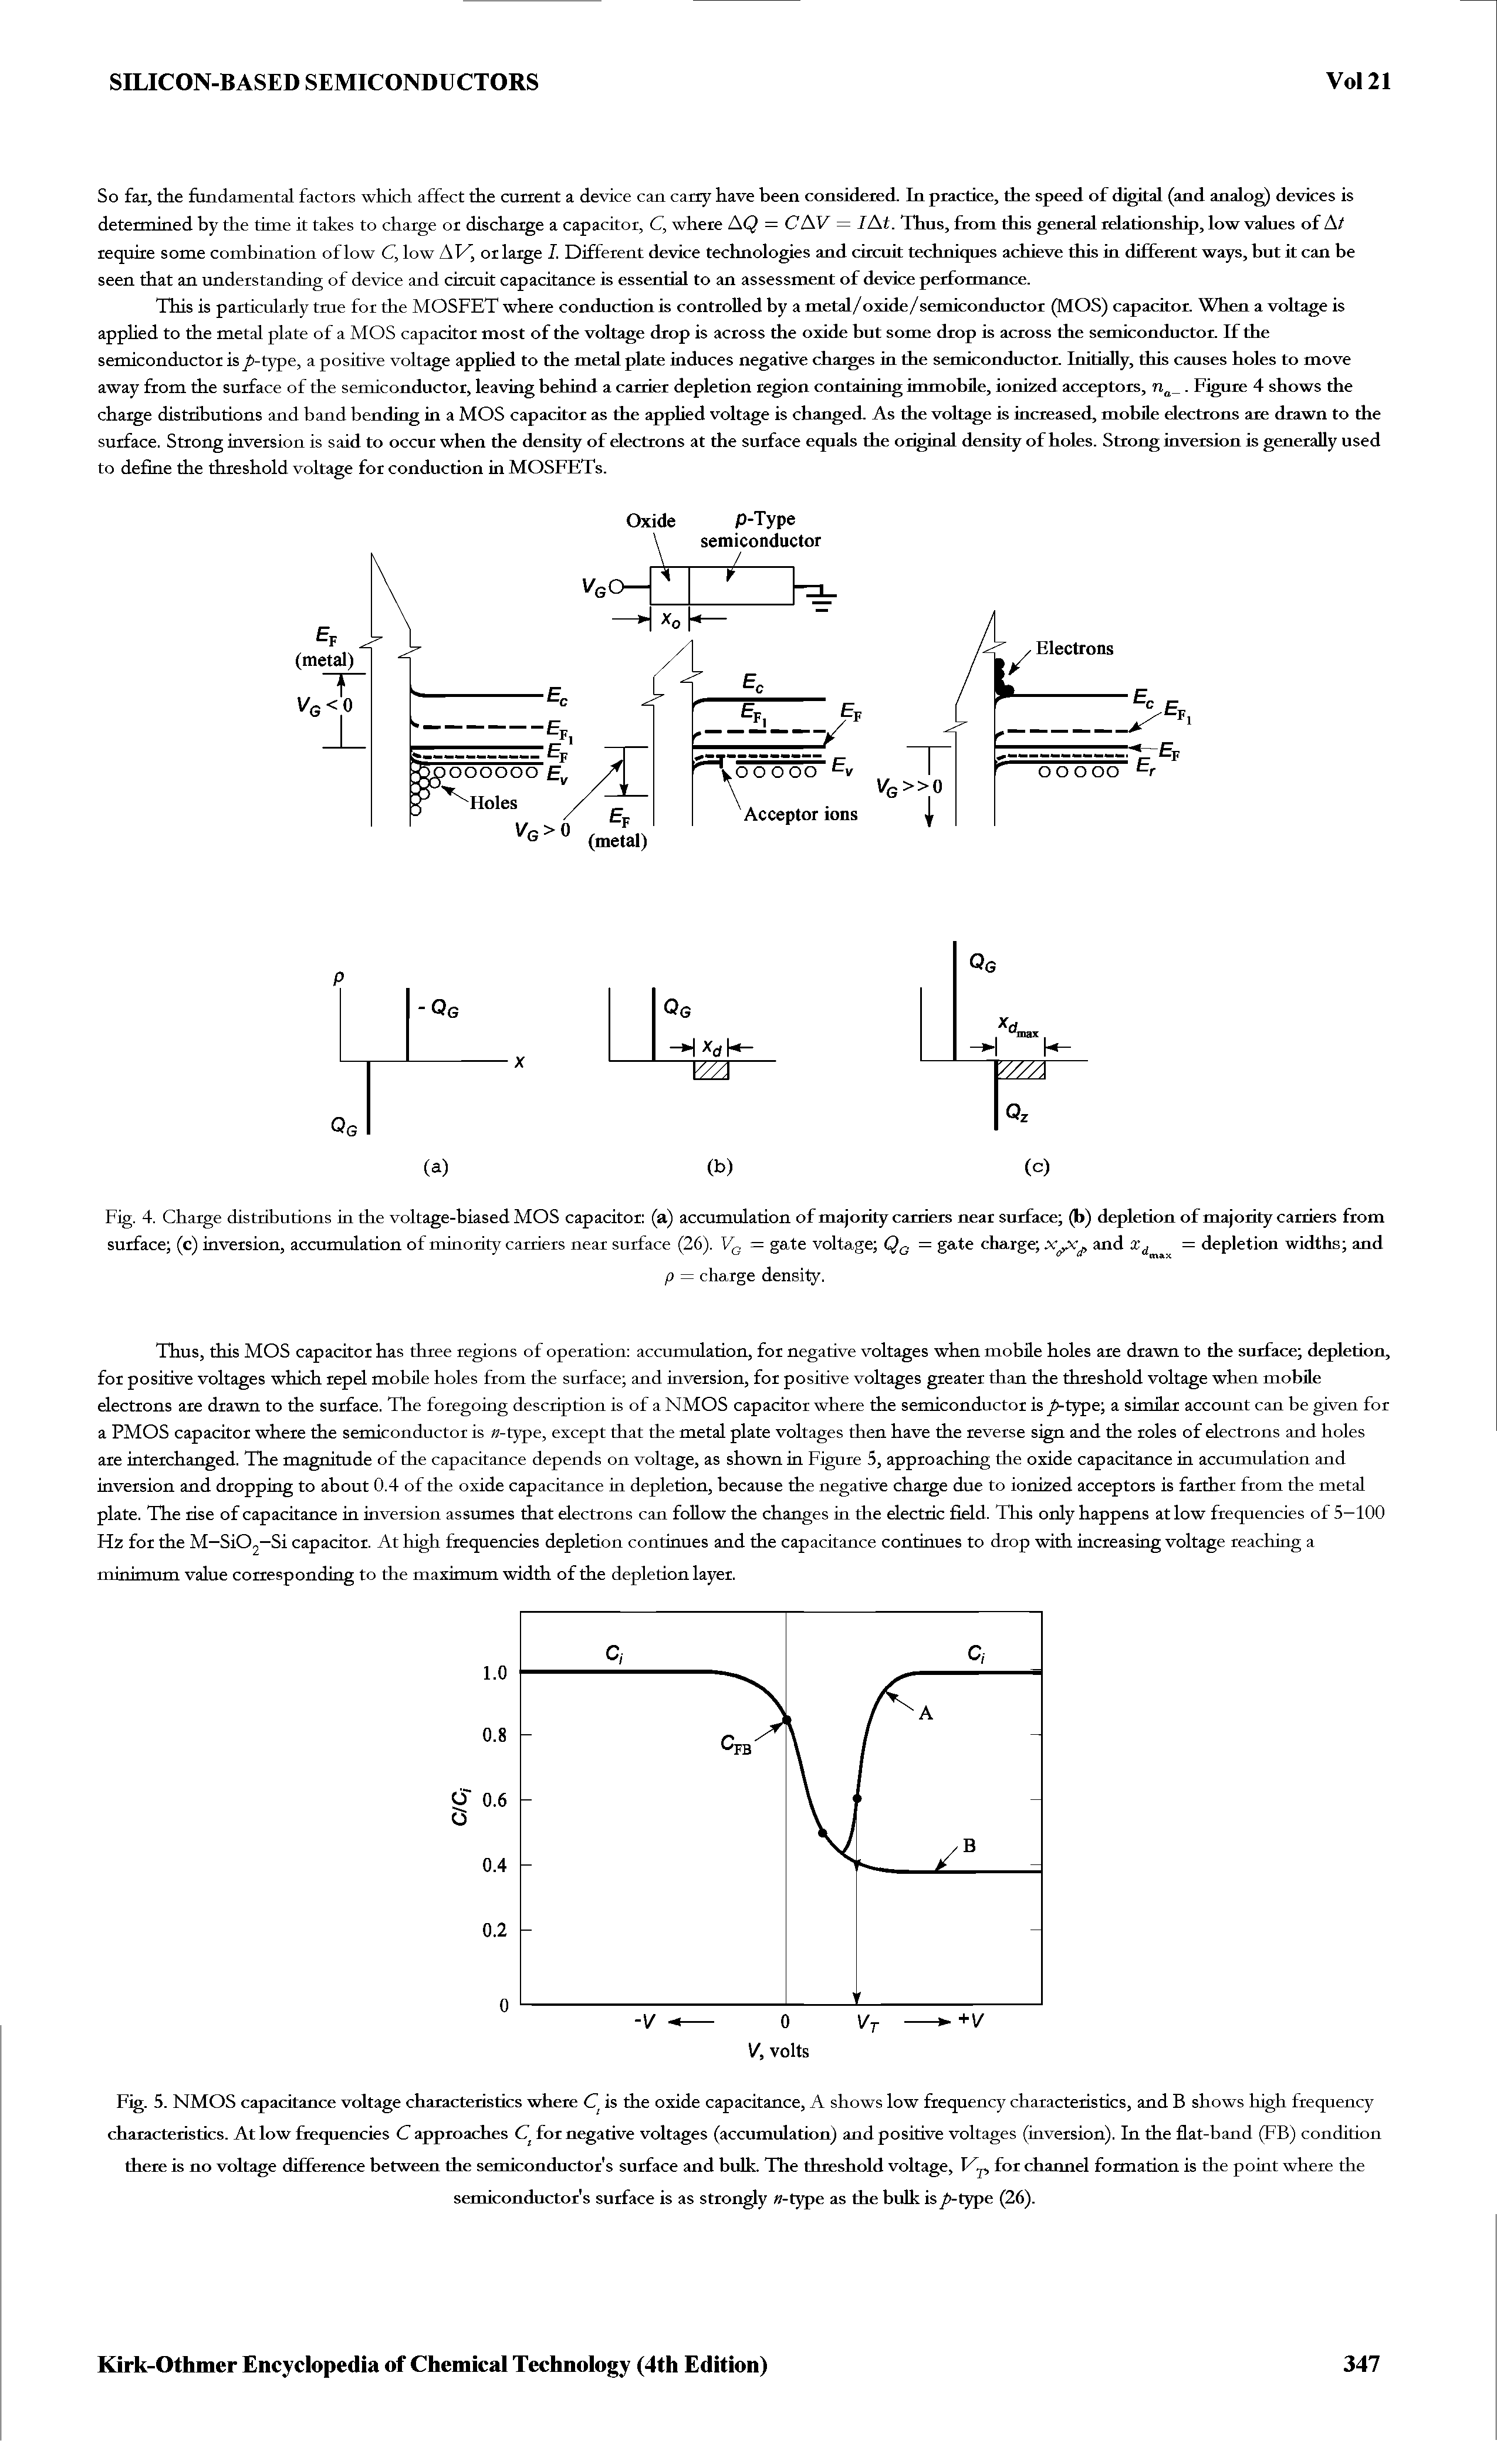 Fig. 4. Charge distributions in the voltage-biased MOS capacitor (a) accumulation of majority carriers near surface (b) depletion of majority carriers from surface (c) inversion, accumulation of minority carriers near surface (26). VG = gate voltage Qq = gate charge xand xd = depletion widths and...